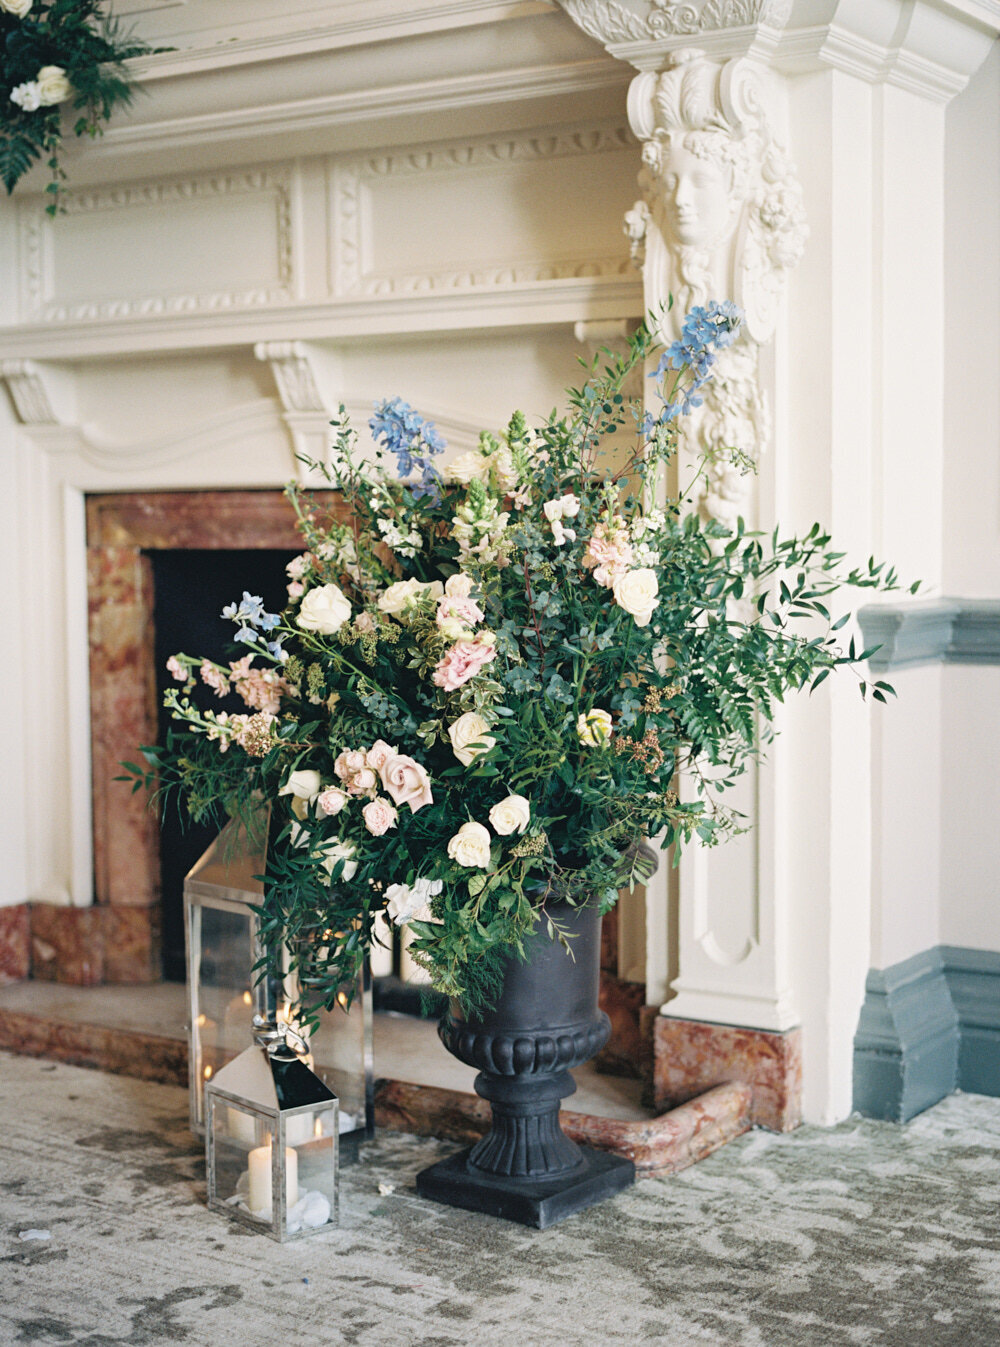 large floor flower arrangement by the fireplace with blue colour blooms